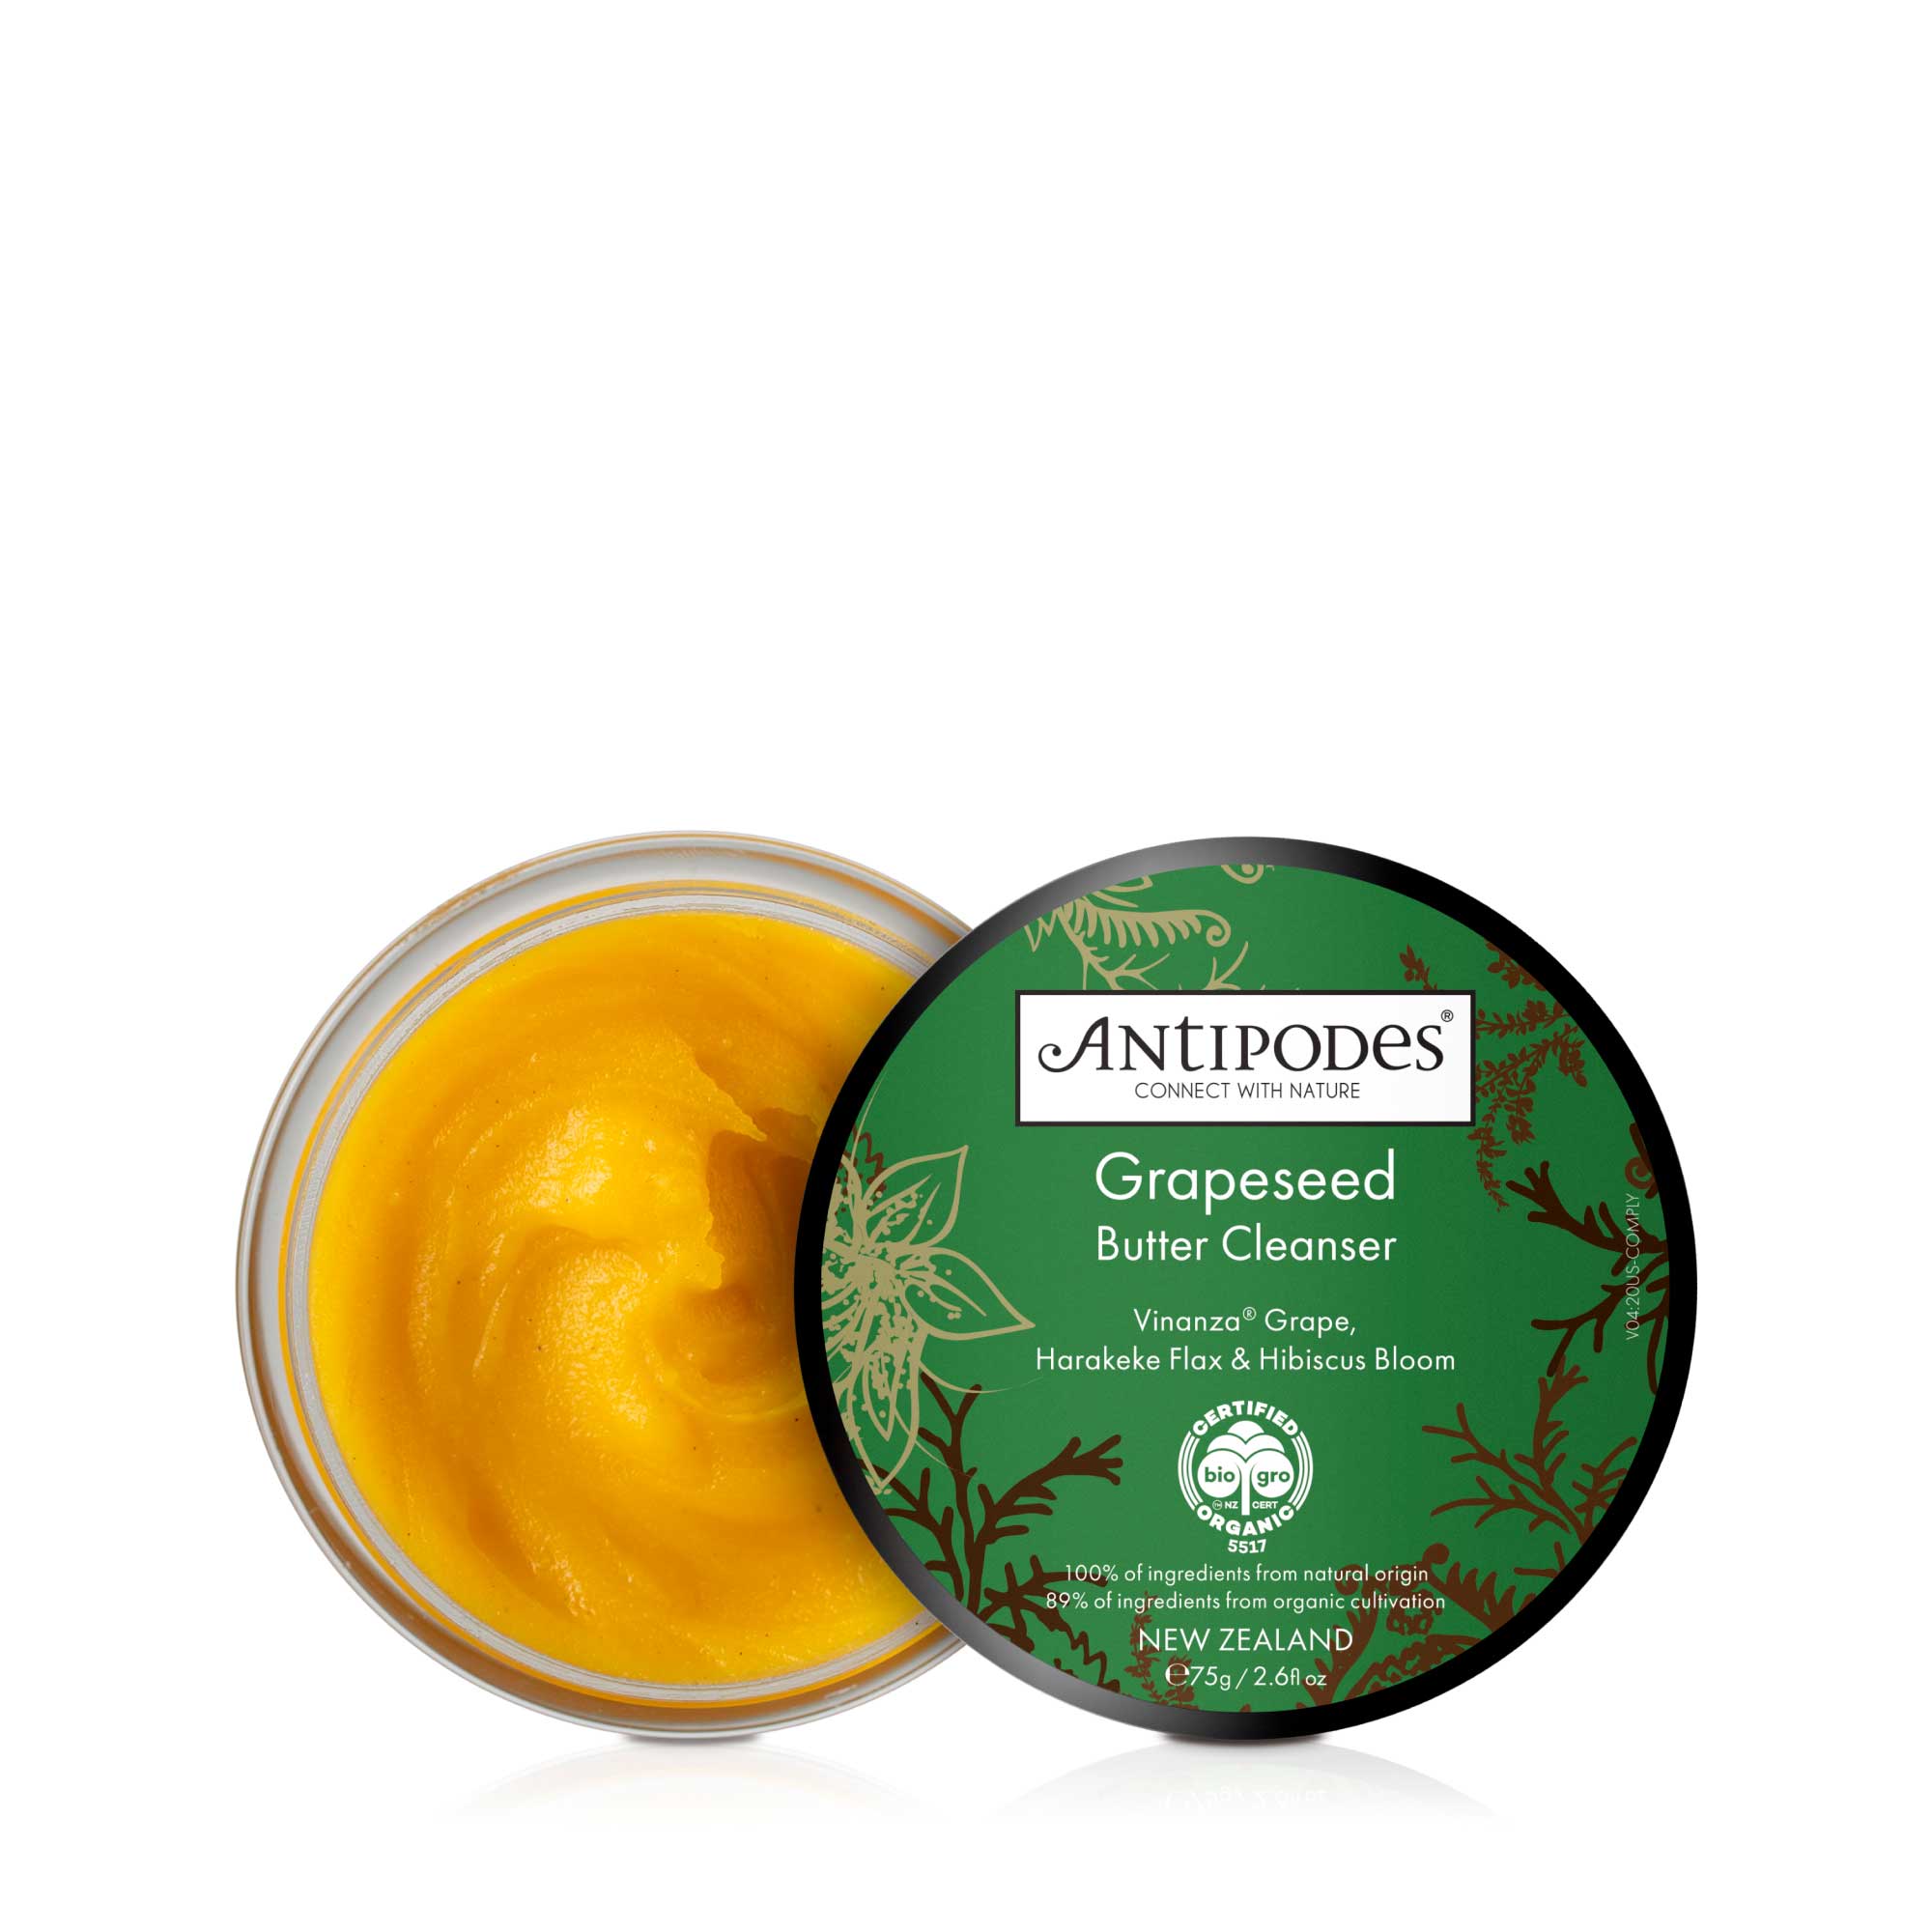 Antipodes Grapeseed Butter Cleanser - 75g